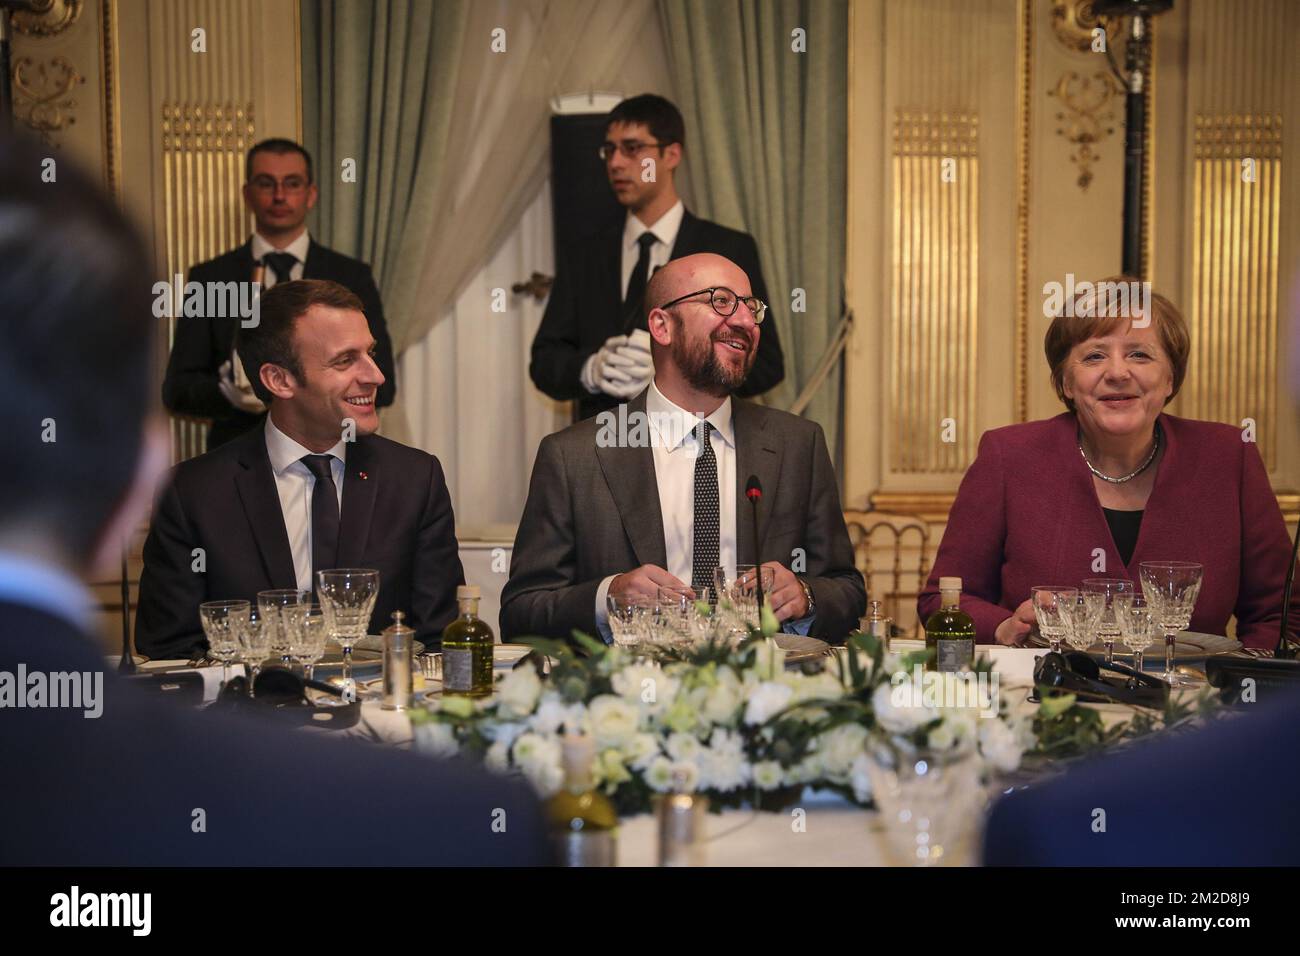 Belgian Prime Minister Charles Michel (C) talks, with President of France Emmanuel Macron (C-L) and Chancellor of Germany Angela Merkel (C-R) and others listening, during an informal dinner for European Heads of State, hosted by the Belgian Prime Minister at the 'Val Duchesse - Hertoginnedal' Castle in Auderghem - Oudergem, Brussels Thursday 22 February 2018. BELGA PHOTO CHANCELLERIE OF THE PRIME MINISTER  Stock Photo